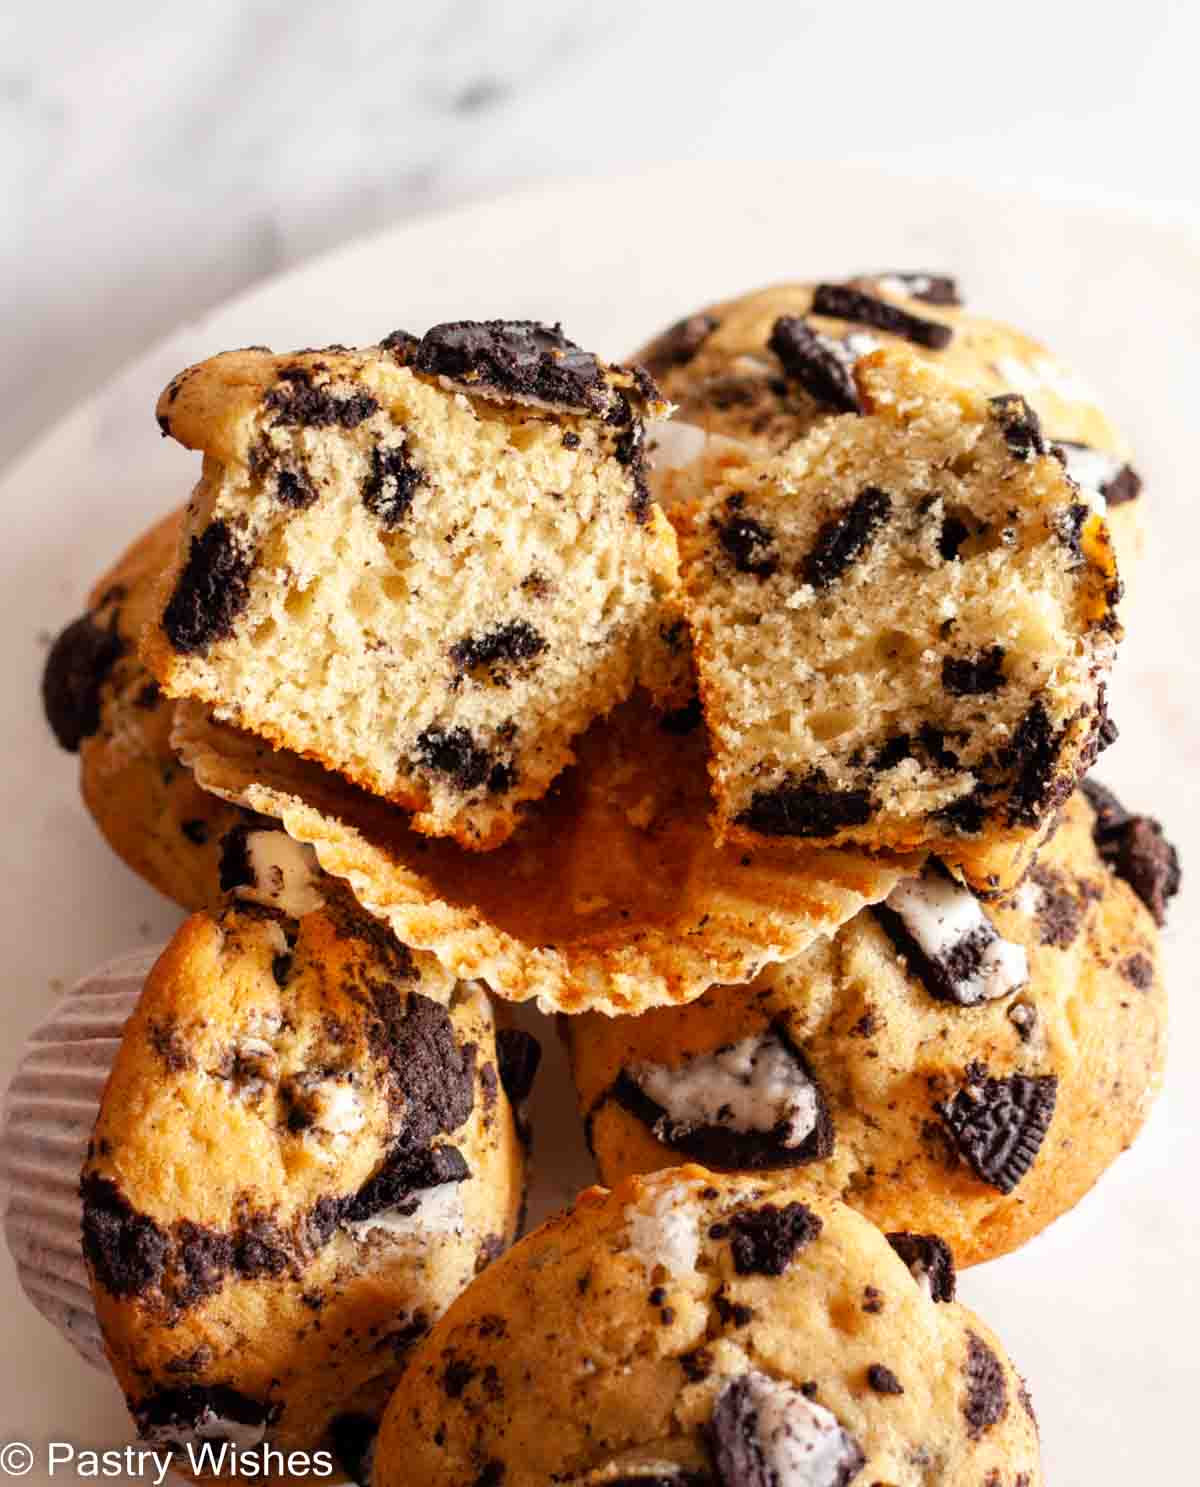 An Oreo muffin cut in half on top of three Oreo muffins on a white surface.